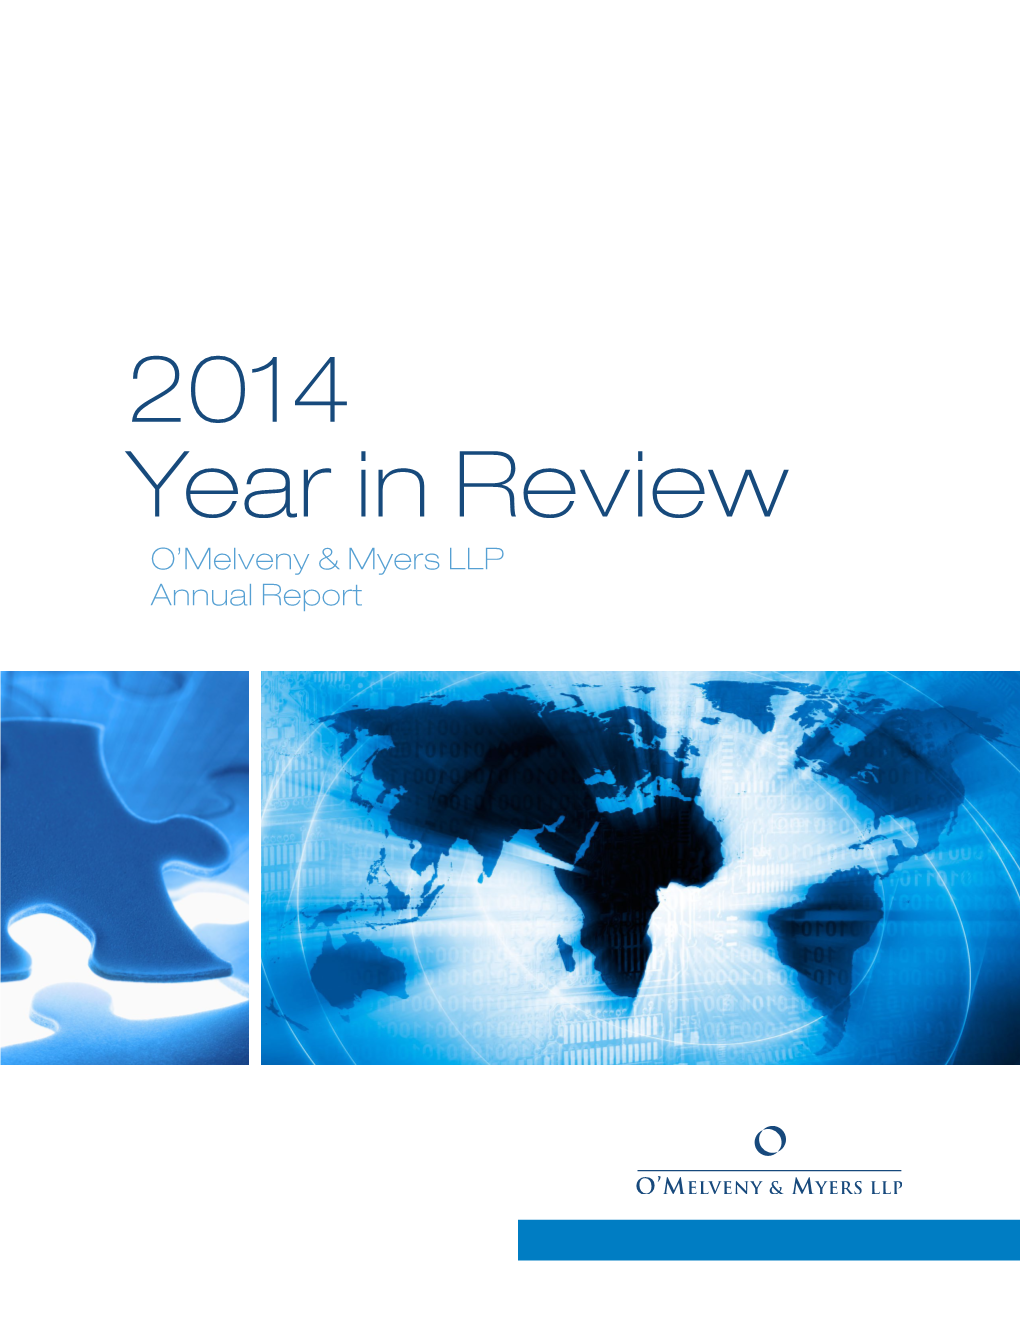 2014 Year in Review O’Melveny & Myers LLP Annual Report